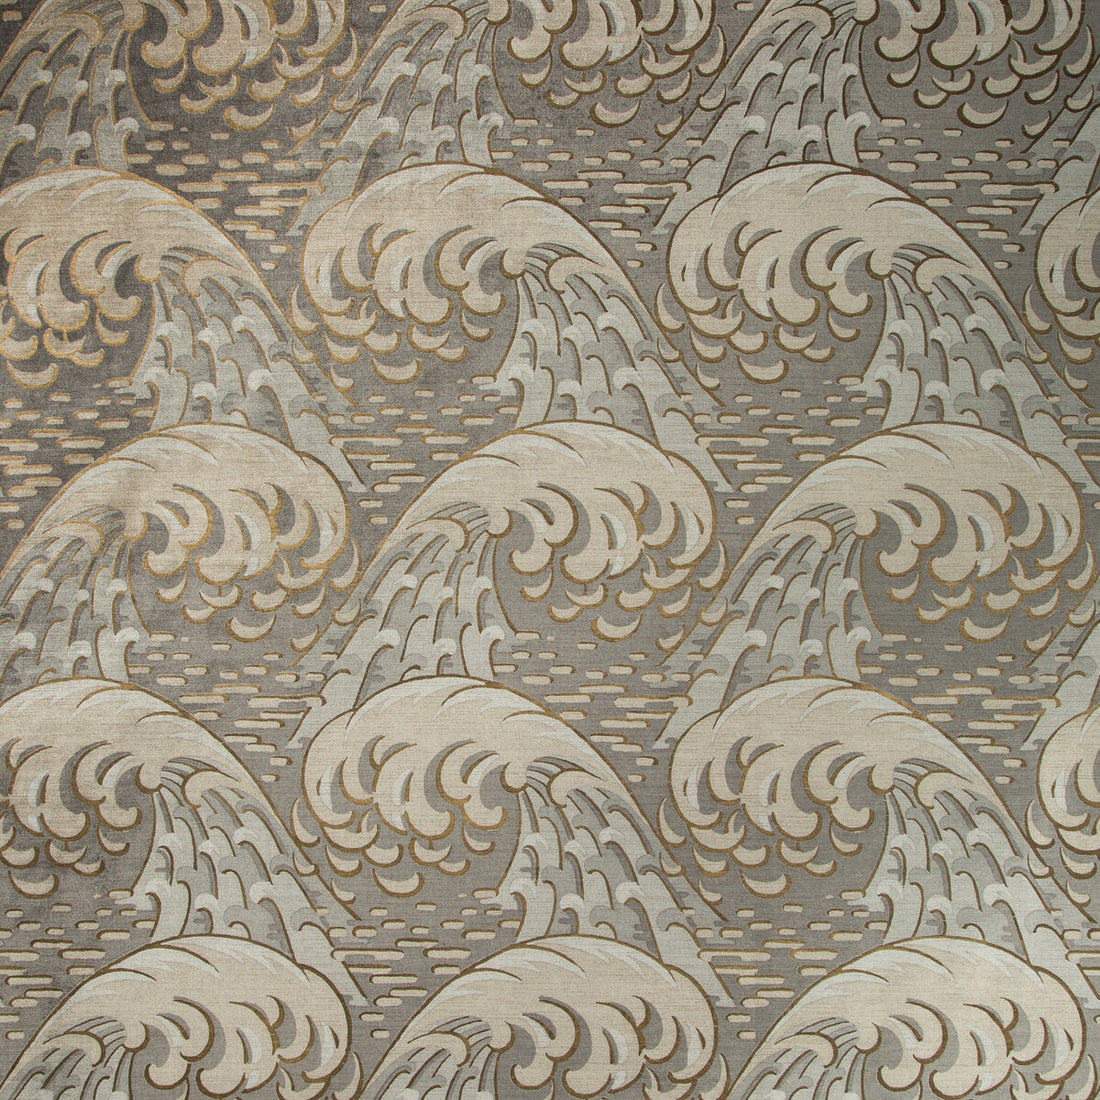 Kaiyou fabric in pewter color - pattern 35419.411.0 - by Kravet Couture in the Izu Collection collection